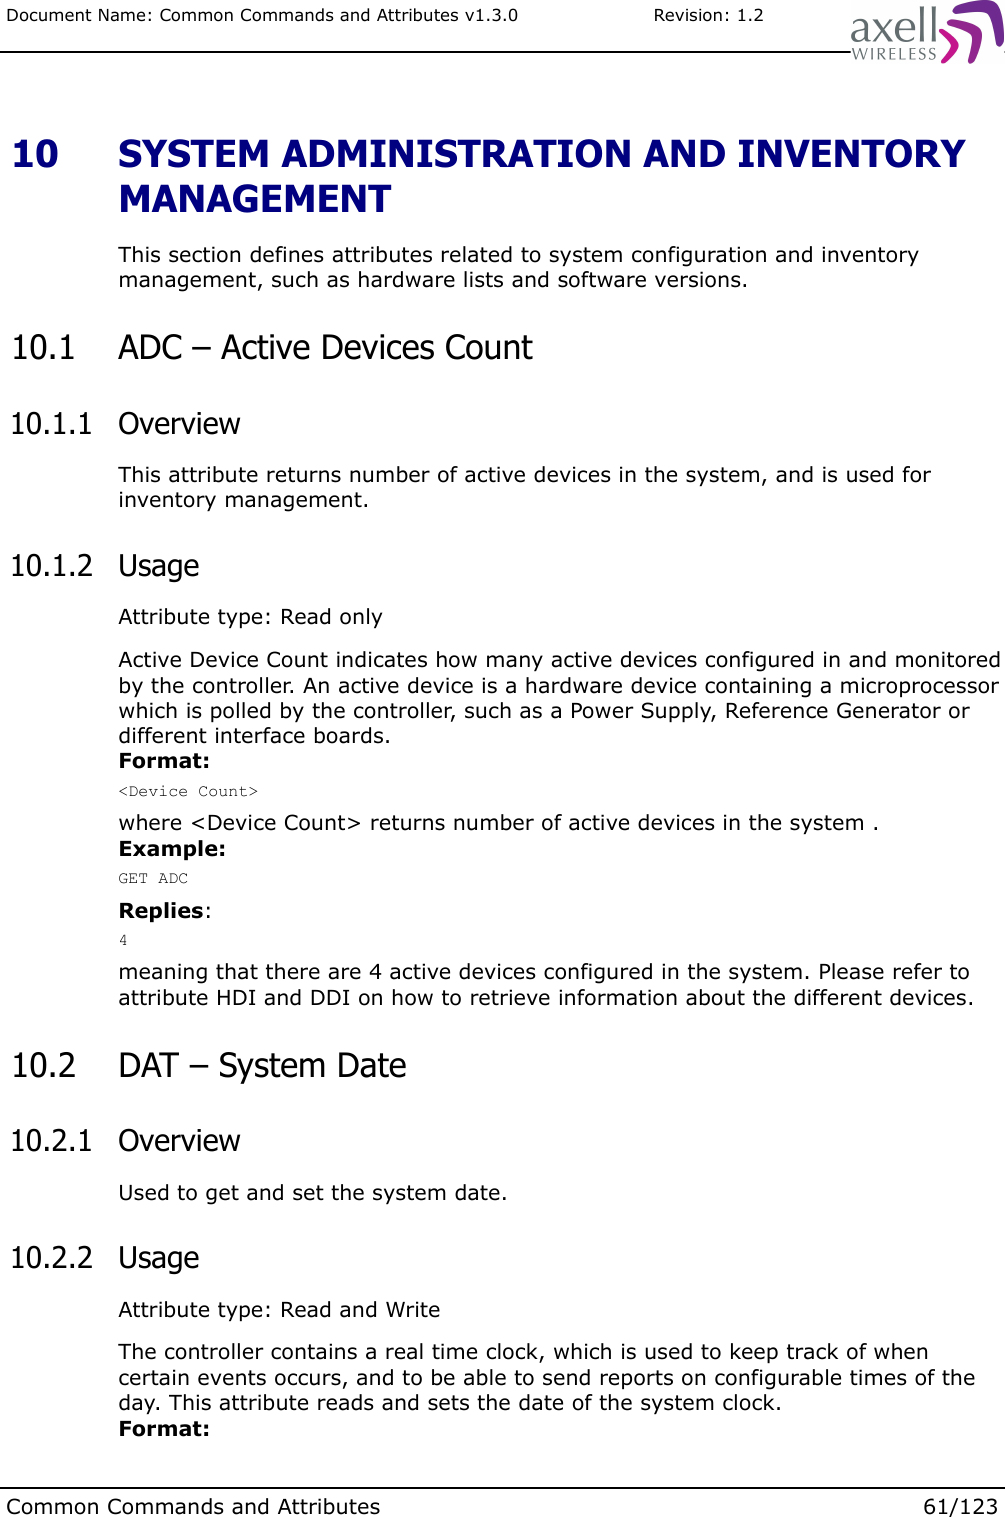 Document Name: Common Commands and Attributes v1.3.0                       Revision: 1.2 10  SYSTEM ADMINISTRATION AND INVENTORY MANAGEMENTThis section defines attributes related to system configuration and inventory management, such as hardware lists and software versions. 10.1  ADC – Active Devices Count 10.1.1  OverviewThis attribute returns number of active devices in the system, and is used for inventory management. 10.1.2  UsageAttribute type: Read onlyActive Device Count indicates how many active devices configured in and monitored by the controller. An active device is a hardware device containing a microprocessor which is polled by the controller, such as a Power Supply, Reference Generator or different interface boards.Format:&lt;Device Count&gt;where &lt;Device Count&gt; returns number of active devices in the system .Example:GET ADCReplies:4meaning that there are 4 active devices configured in the system. Please refer to attribute HDI and DDI on how to retrieve information about the different devices. 10.2  DAT – System Date 10.2.1  OverviewUsed to get and set the system date. 10.2.2  UsageAttribute type: Read and WriteThe controller contains a real time clock, which is used to keep track of when certain events occurs, and to be able to send reports on configurable times of the day. This attribute reads and sets the date of the system clock.Format:Common Commands and Attributes 61/123